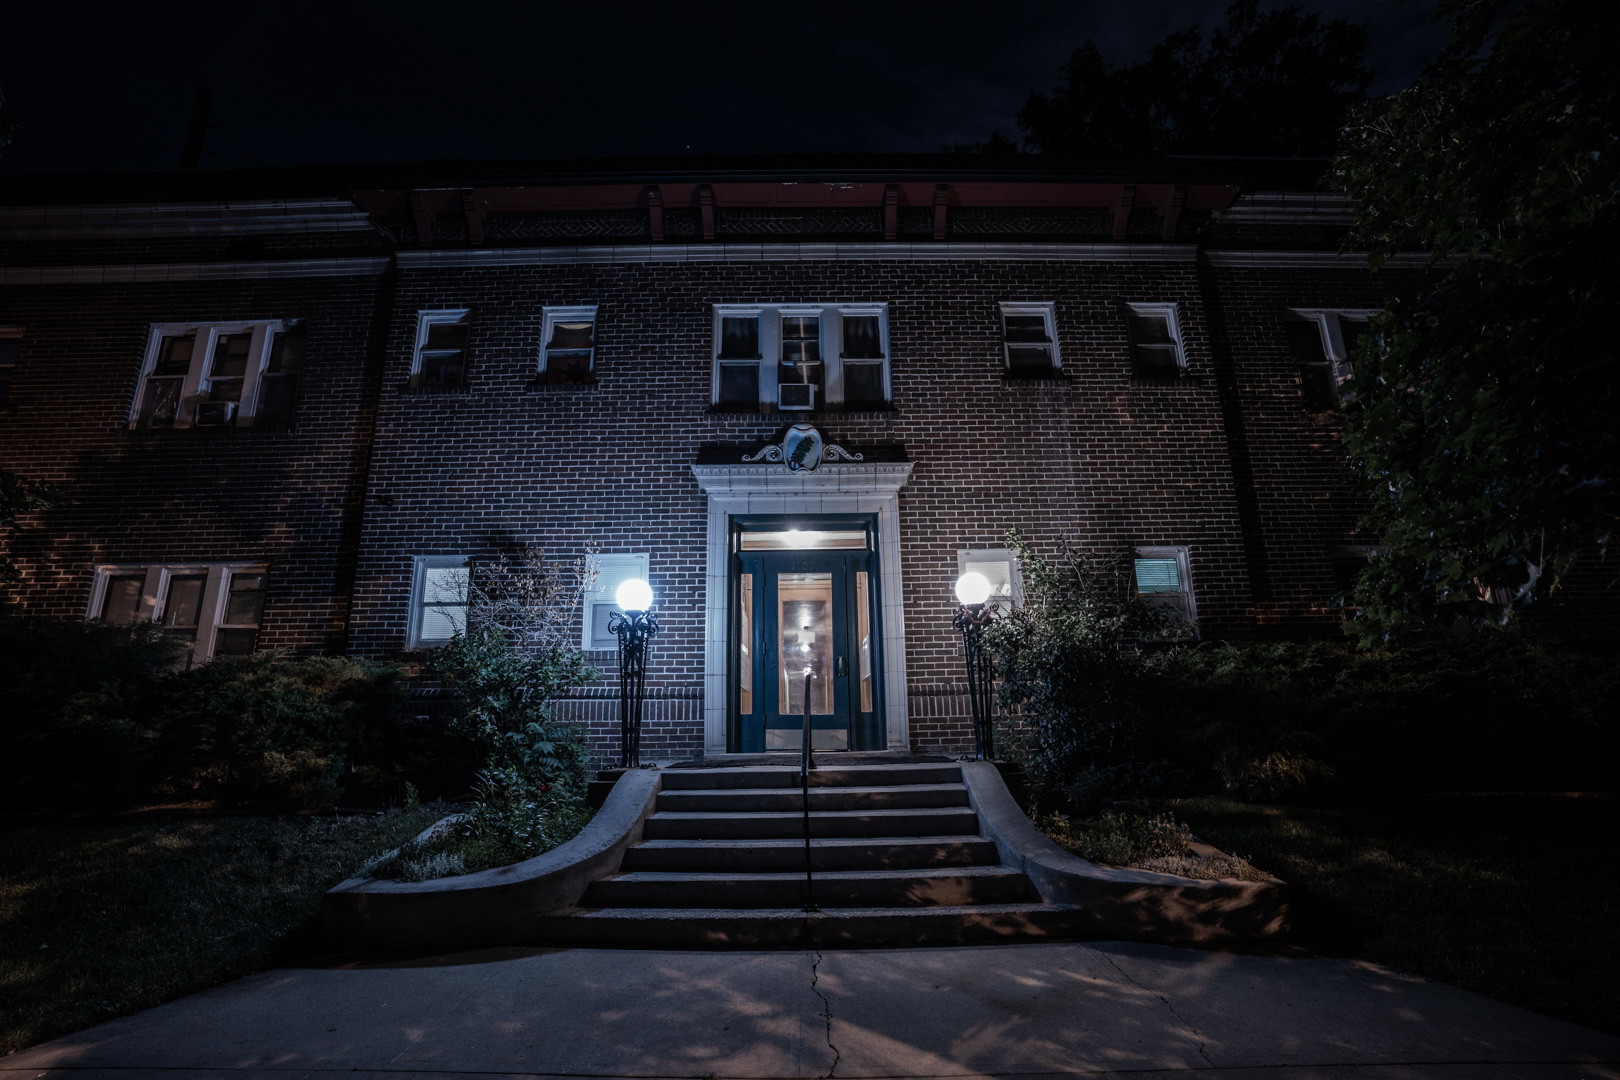 Croke-Patterson-Campbell House Haunted Denver